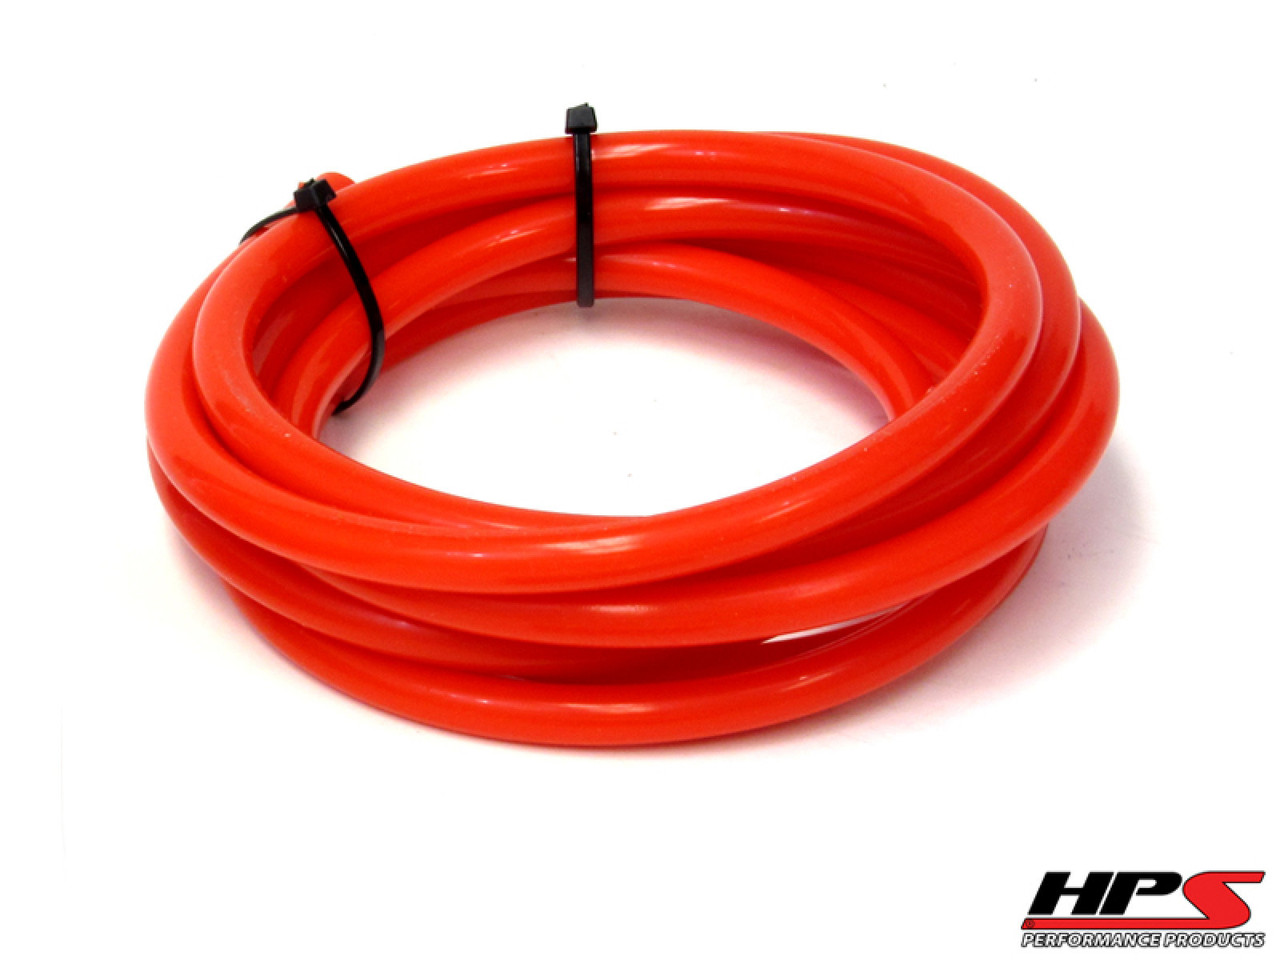 HPS 1/4" (6mm) ID Red High Temp Silicone Vacuum Hose - 10 Feet Pack (HPS-HTSVH6-REDx10)